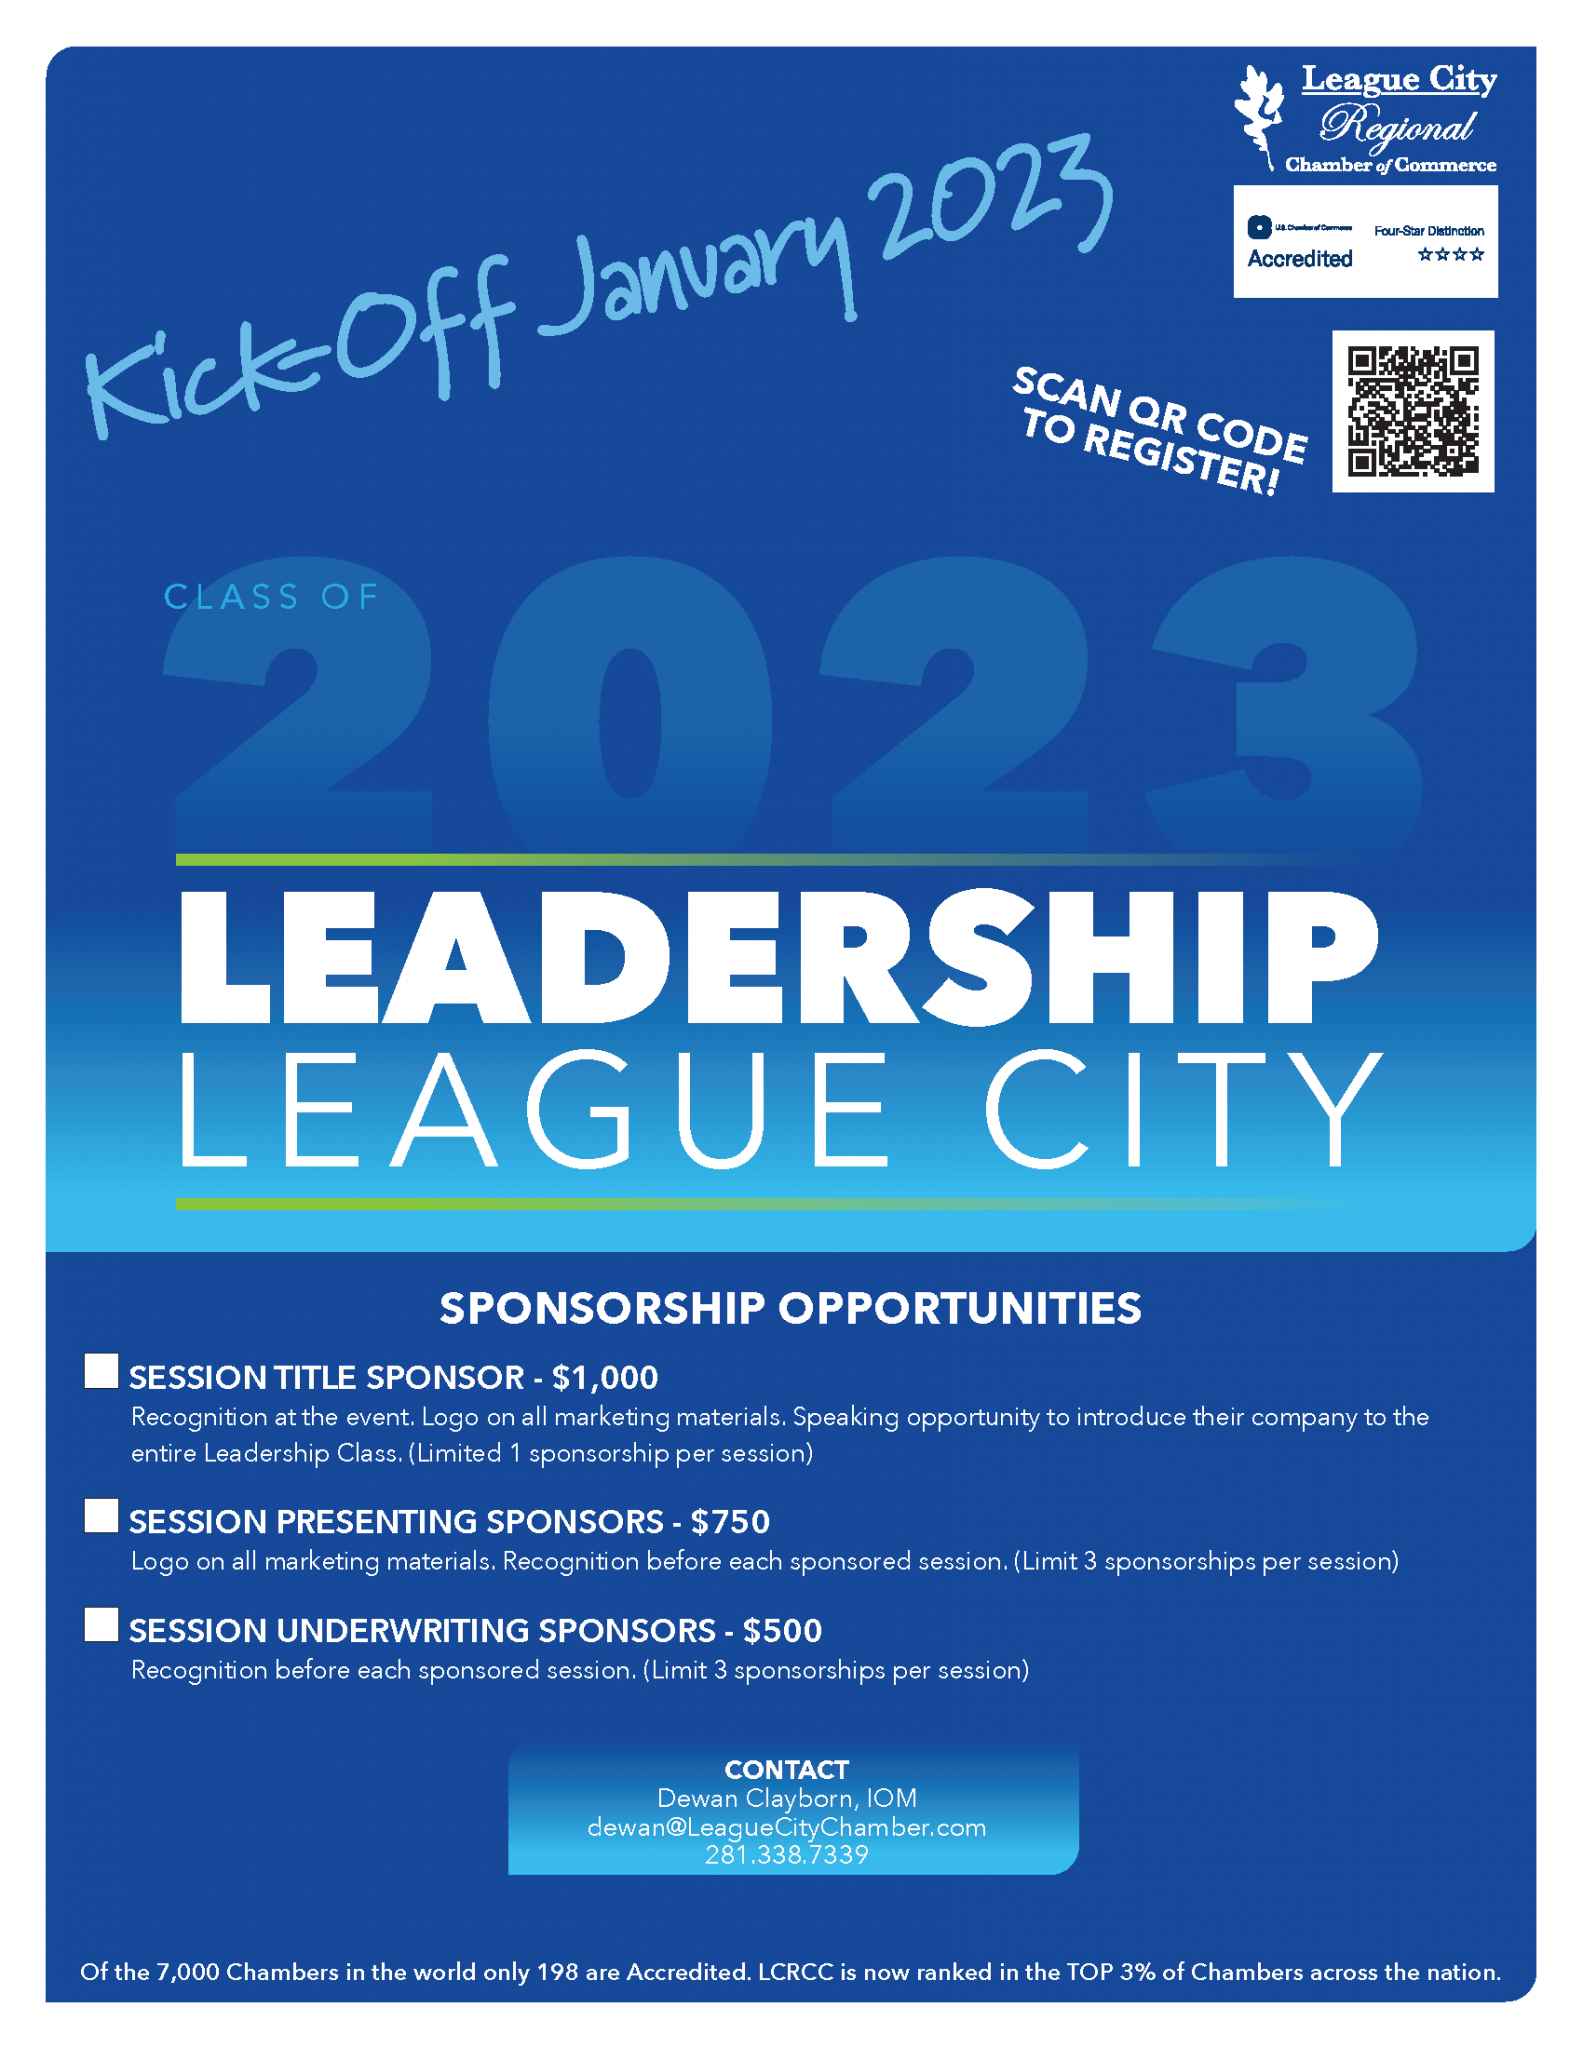 Image for Lead into the new year with Leadership League City!